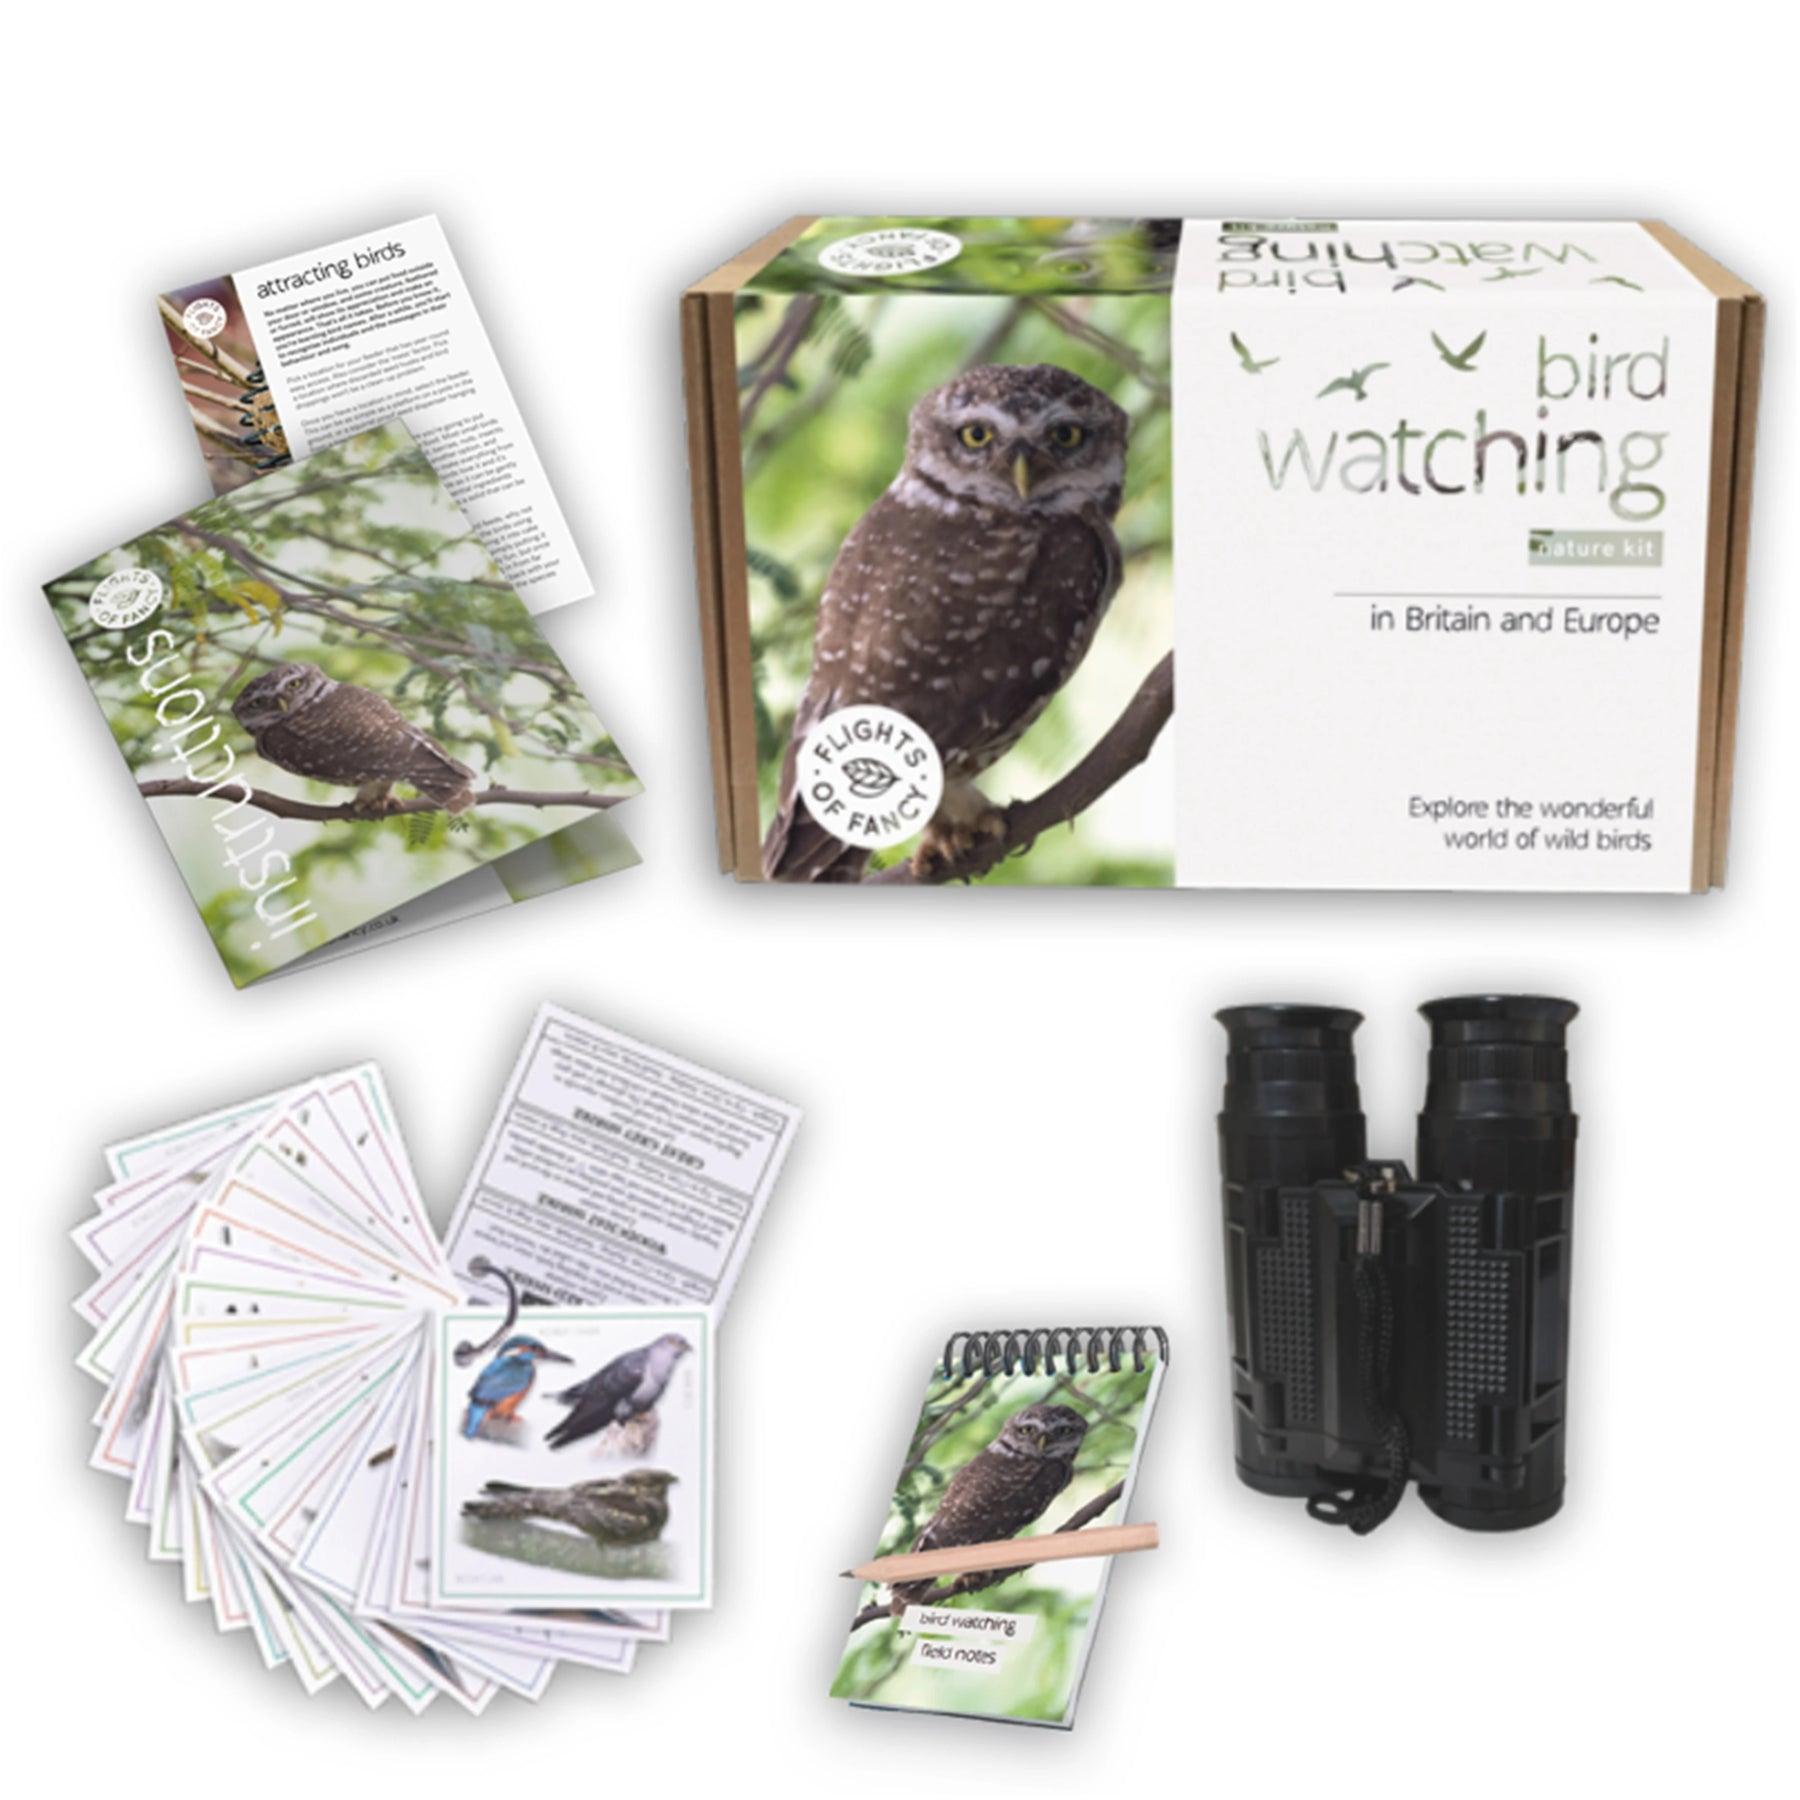 Contents of the bird watching kit including notebook and binoculars.